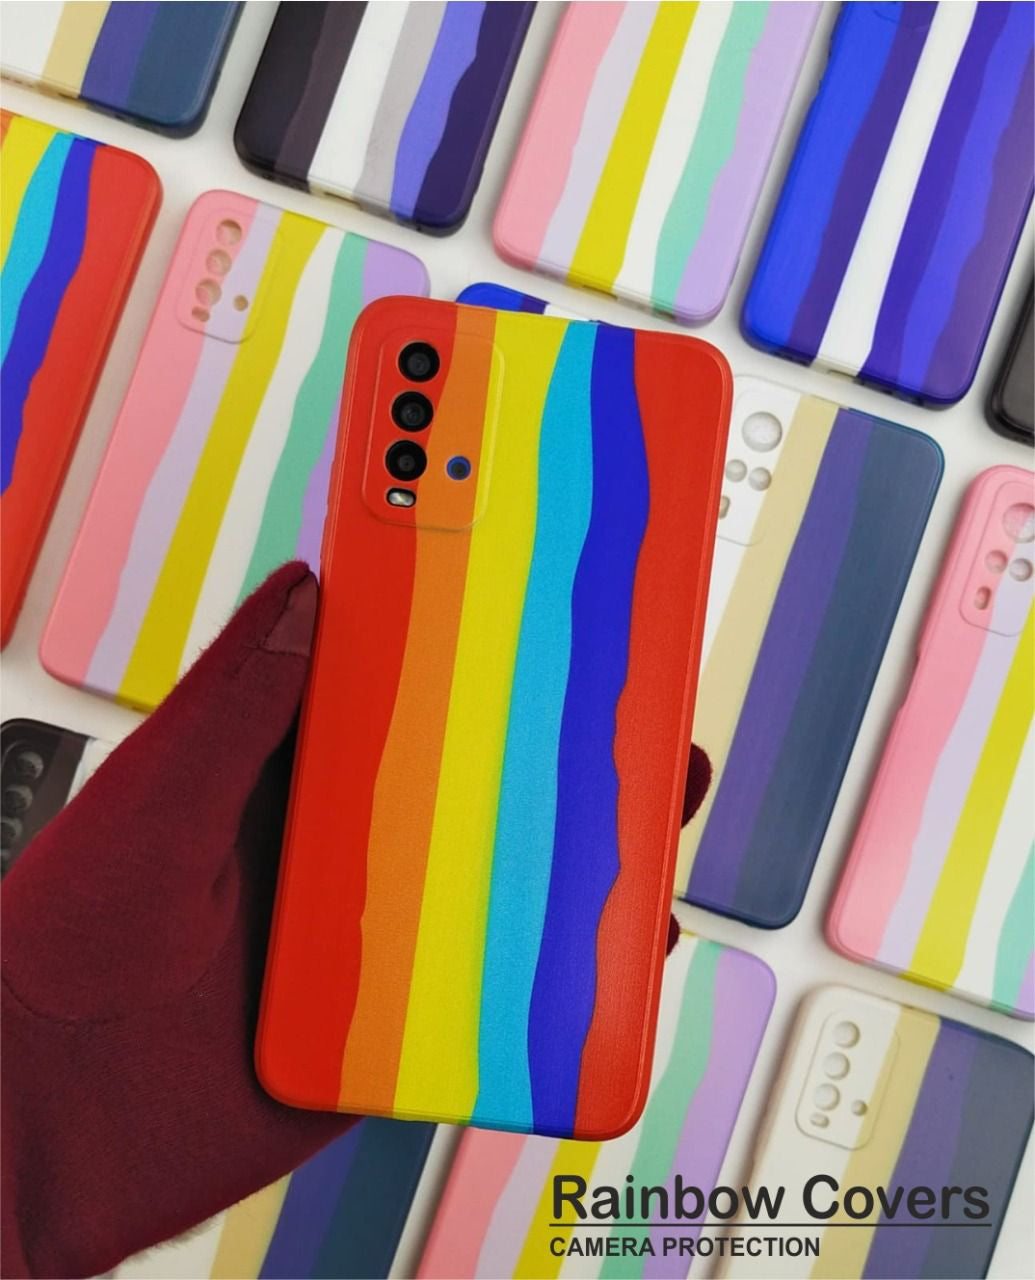 21261 SAMSUNG'S Rainbow Soft Printed Case With Soft Material | Softness with Phone Protection Cover | For Girls Boys Women Kids Soft Case Cover | Soft Case Shockproof Case | With Soft Edges & Full Camera Protection